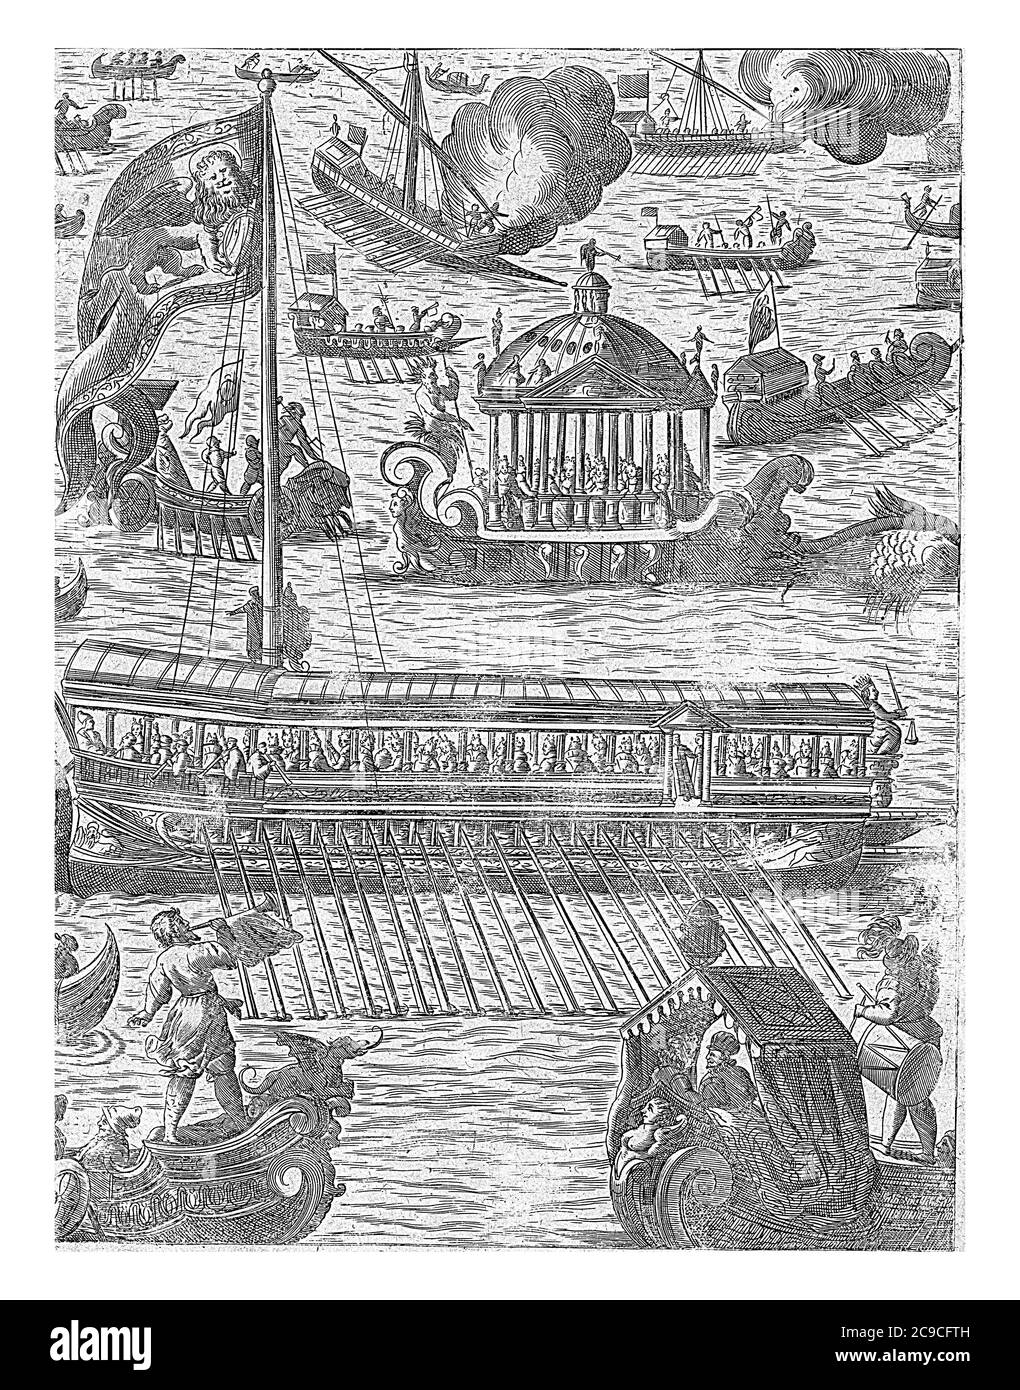 Several ships, including the Bucintoro, the galley of the doge, vintage engraving. Stock Photo